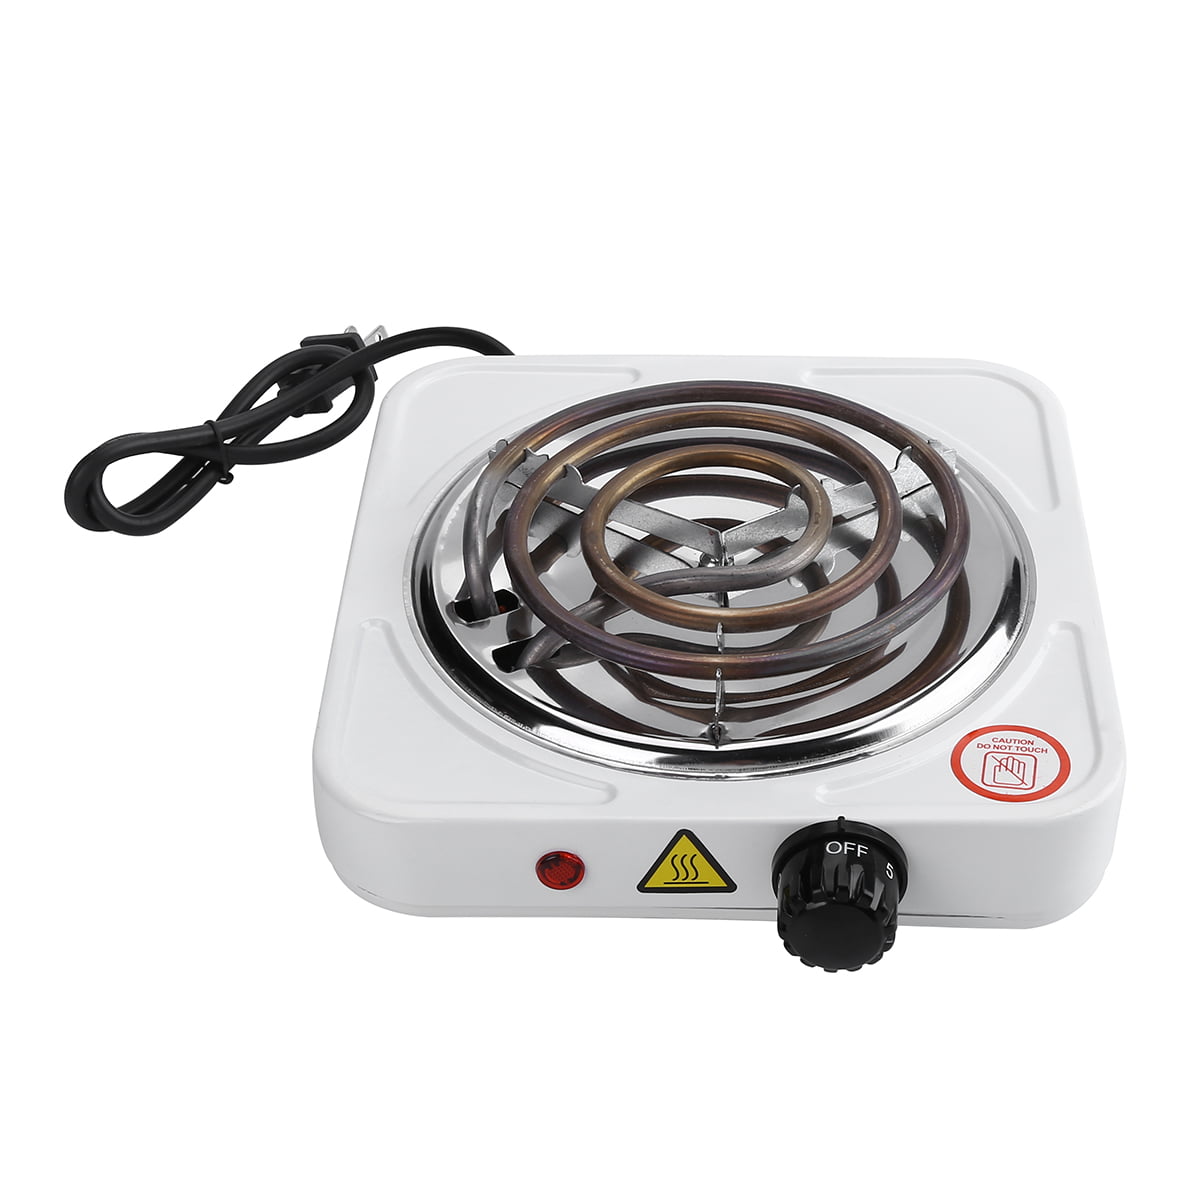 CUKOR Electric Single Coil Burner Portable Hot Plate 1100 Watt Powered Kitchen Cooktop with Non-Slip Rubber Feet Perfect for Outdoor Cooking